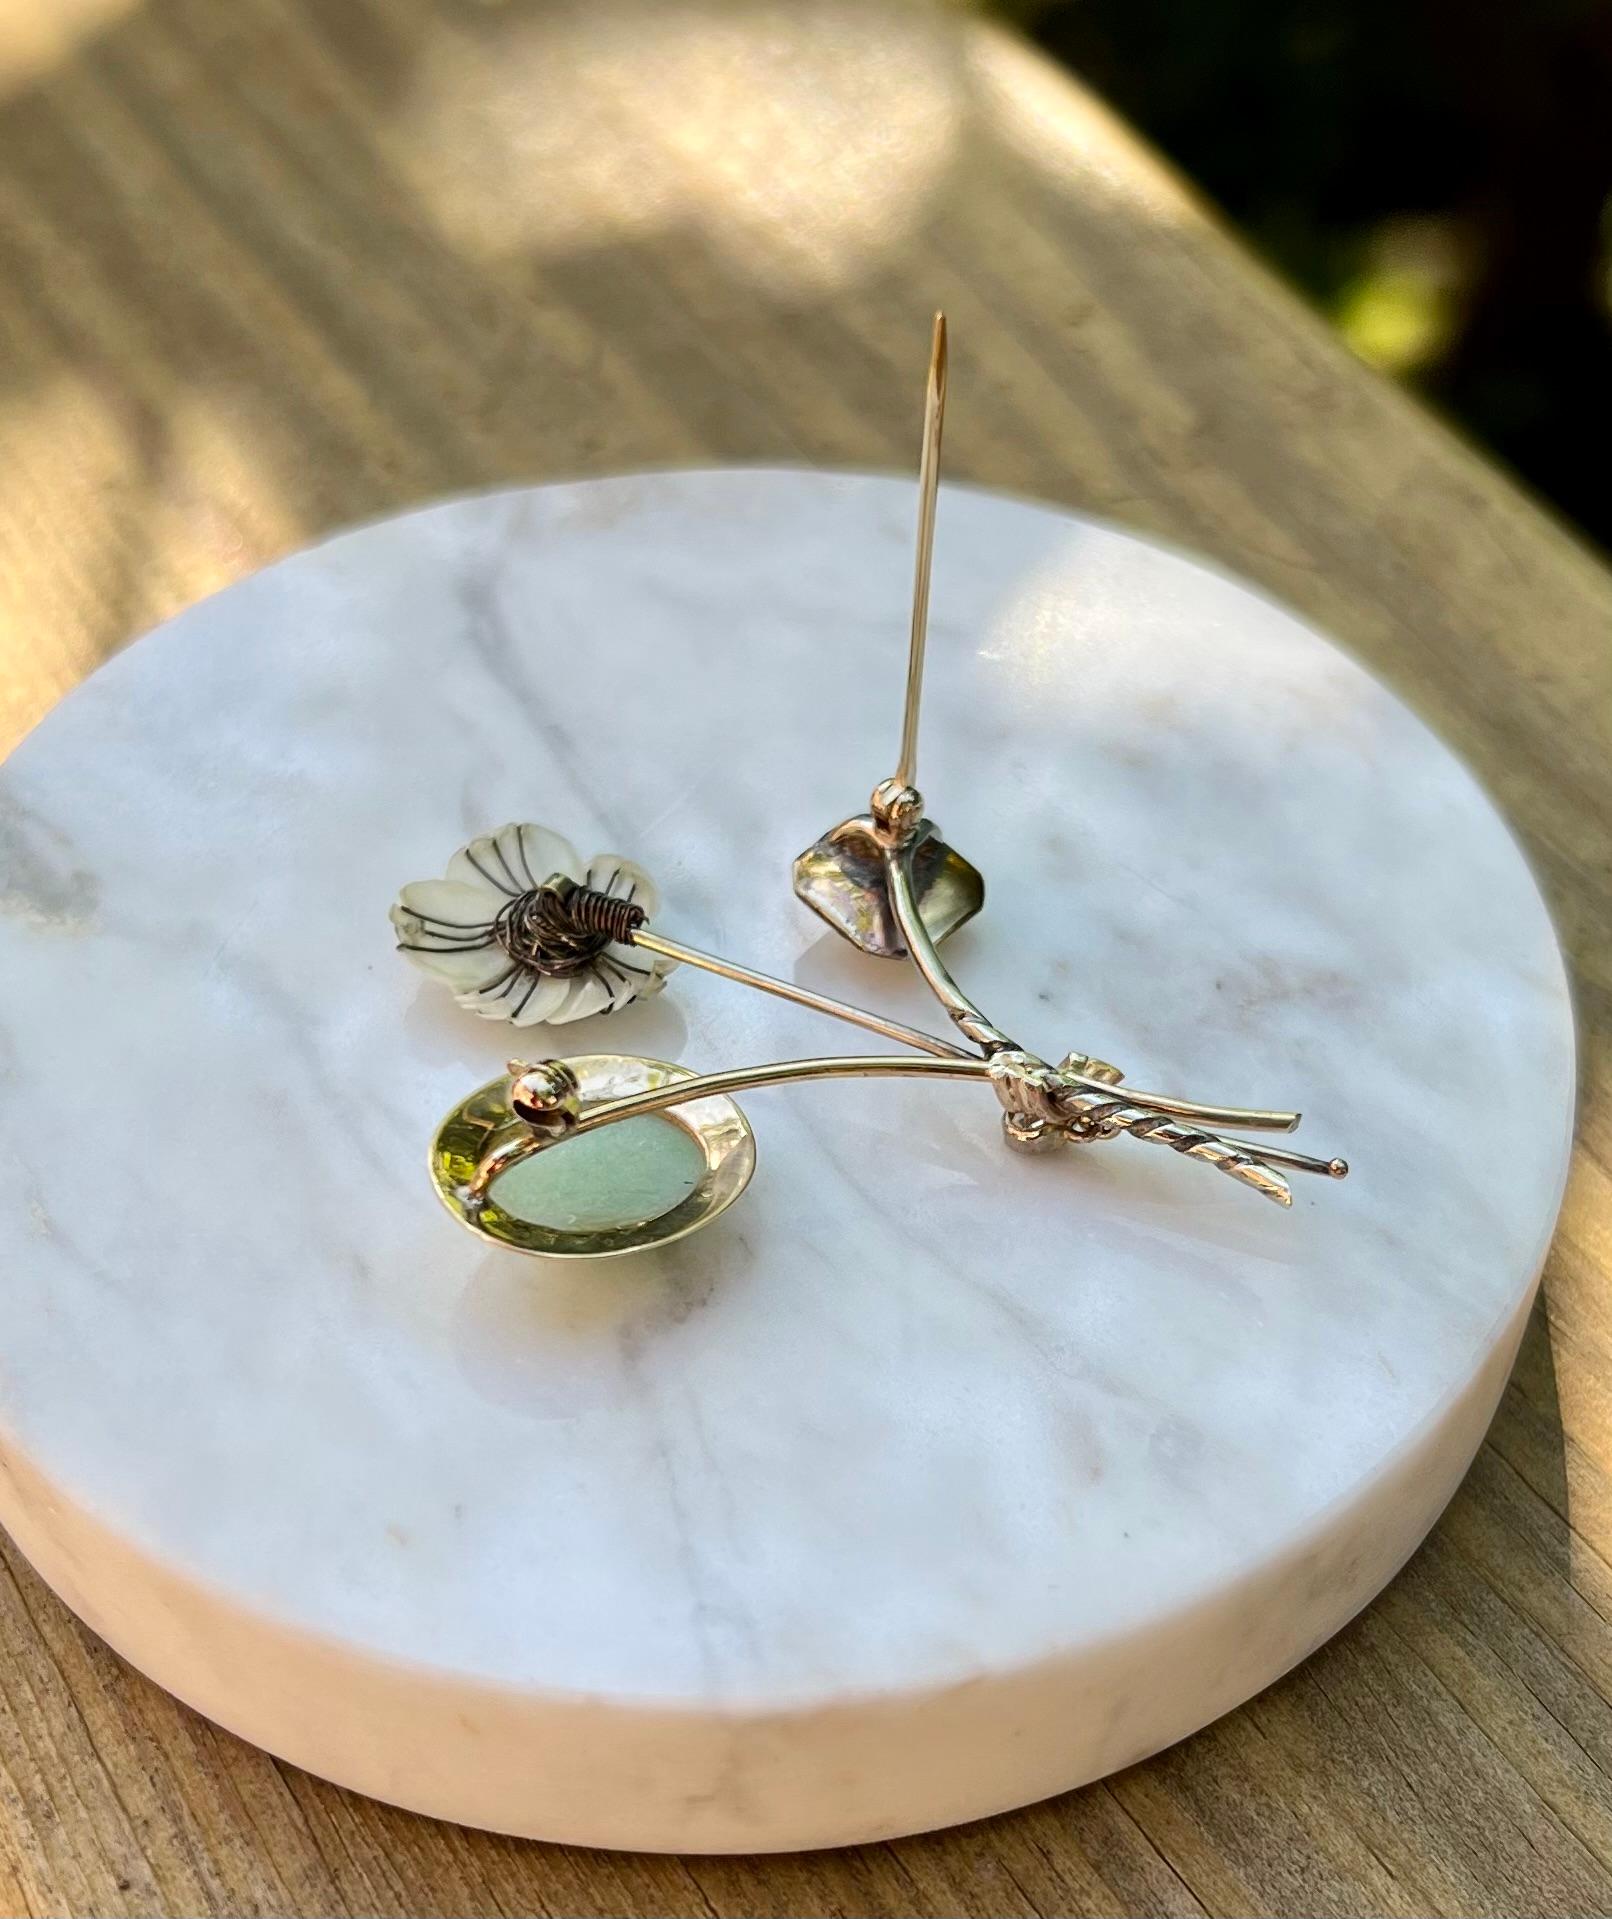 One 14 karat yellow gold (stamped 14K) and sterling silver pin set with one oval jade stone, two cultured pearls, shell, and one rose-cut diamond, approximately 0.10-carat total weight with I/J color and I1 clarity.  The pin measures 2 inches long